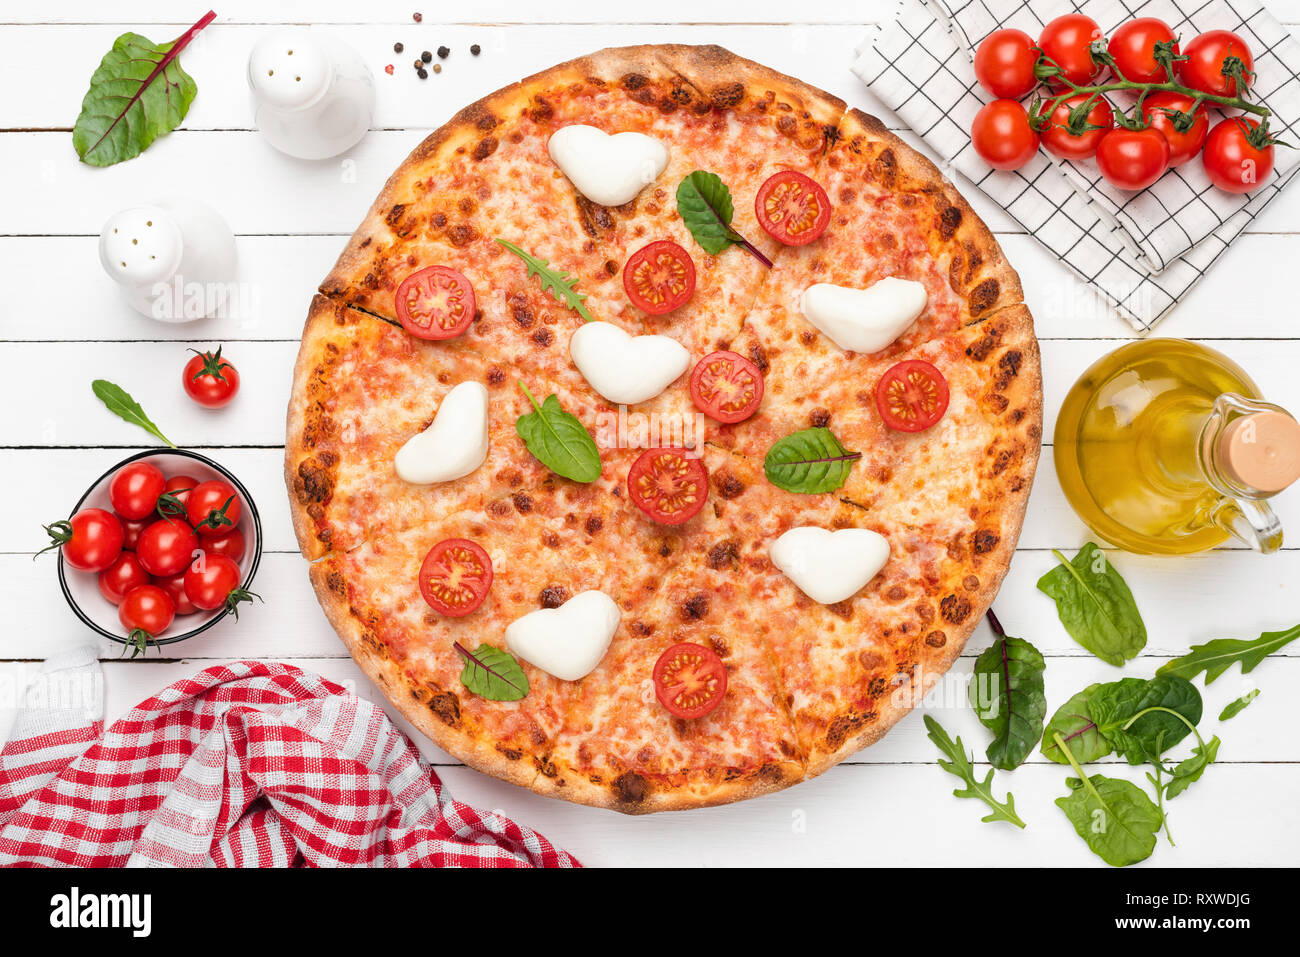 Hot Italian Pizza With Heart Shaped Mozzarella, Tomatoes, Cheese And Green Salad Leaf. Top View. Food Flat Lay Stock Photo